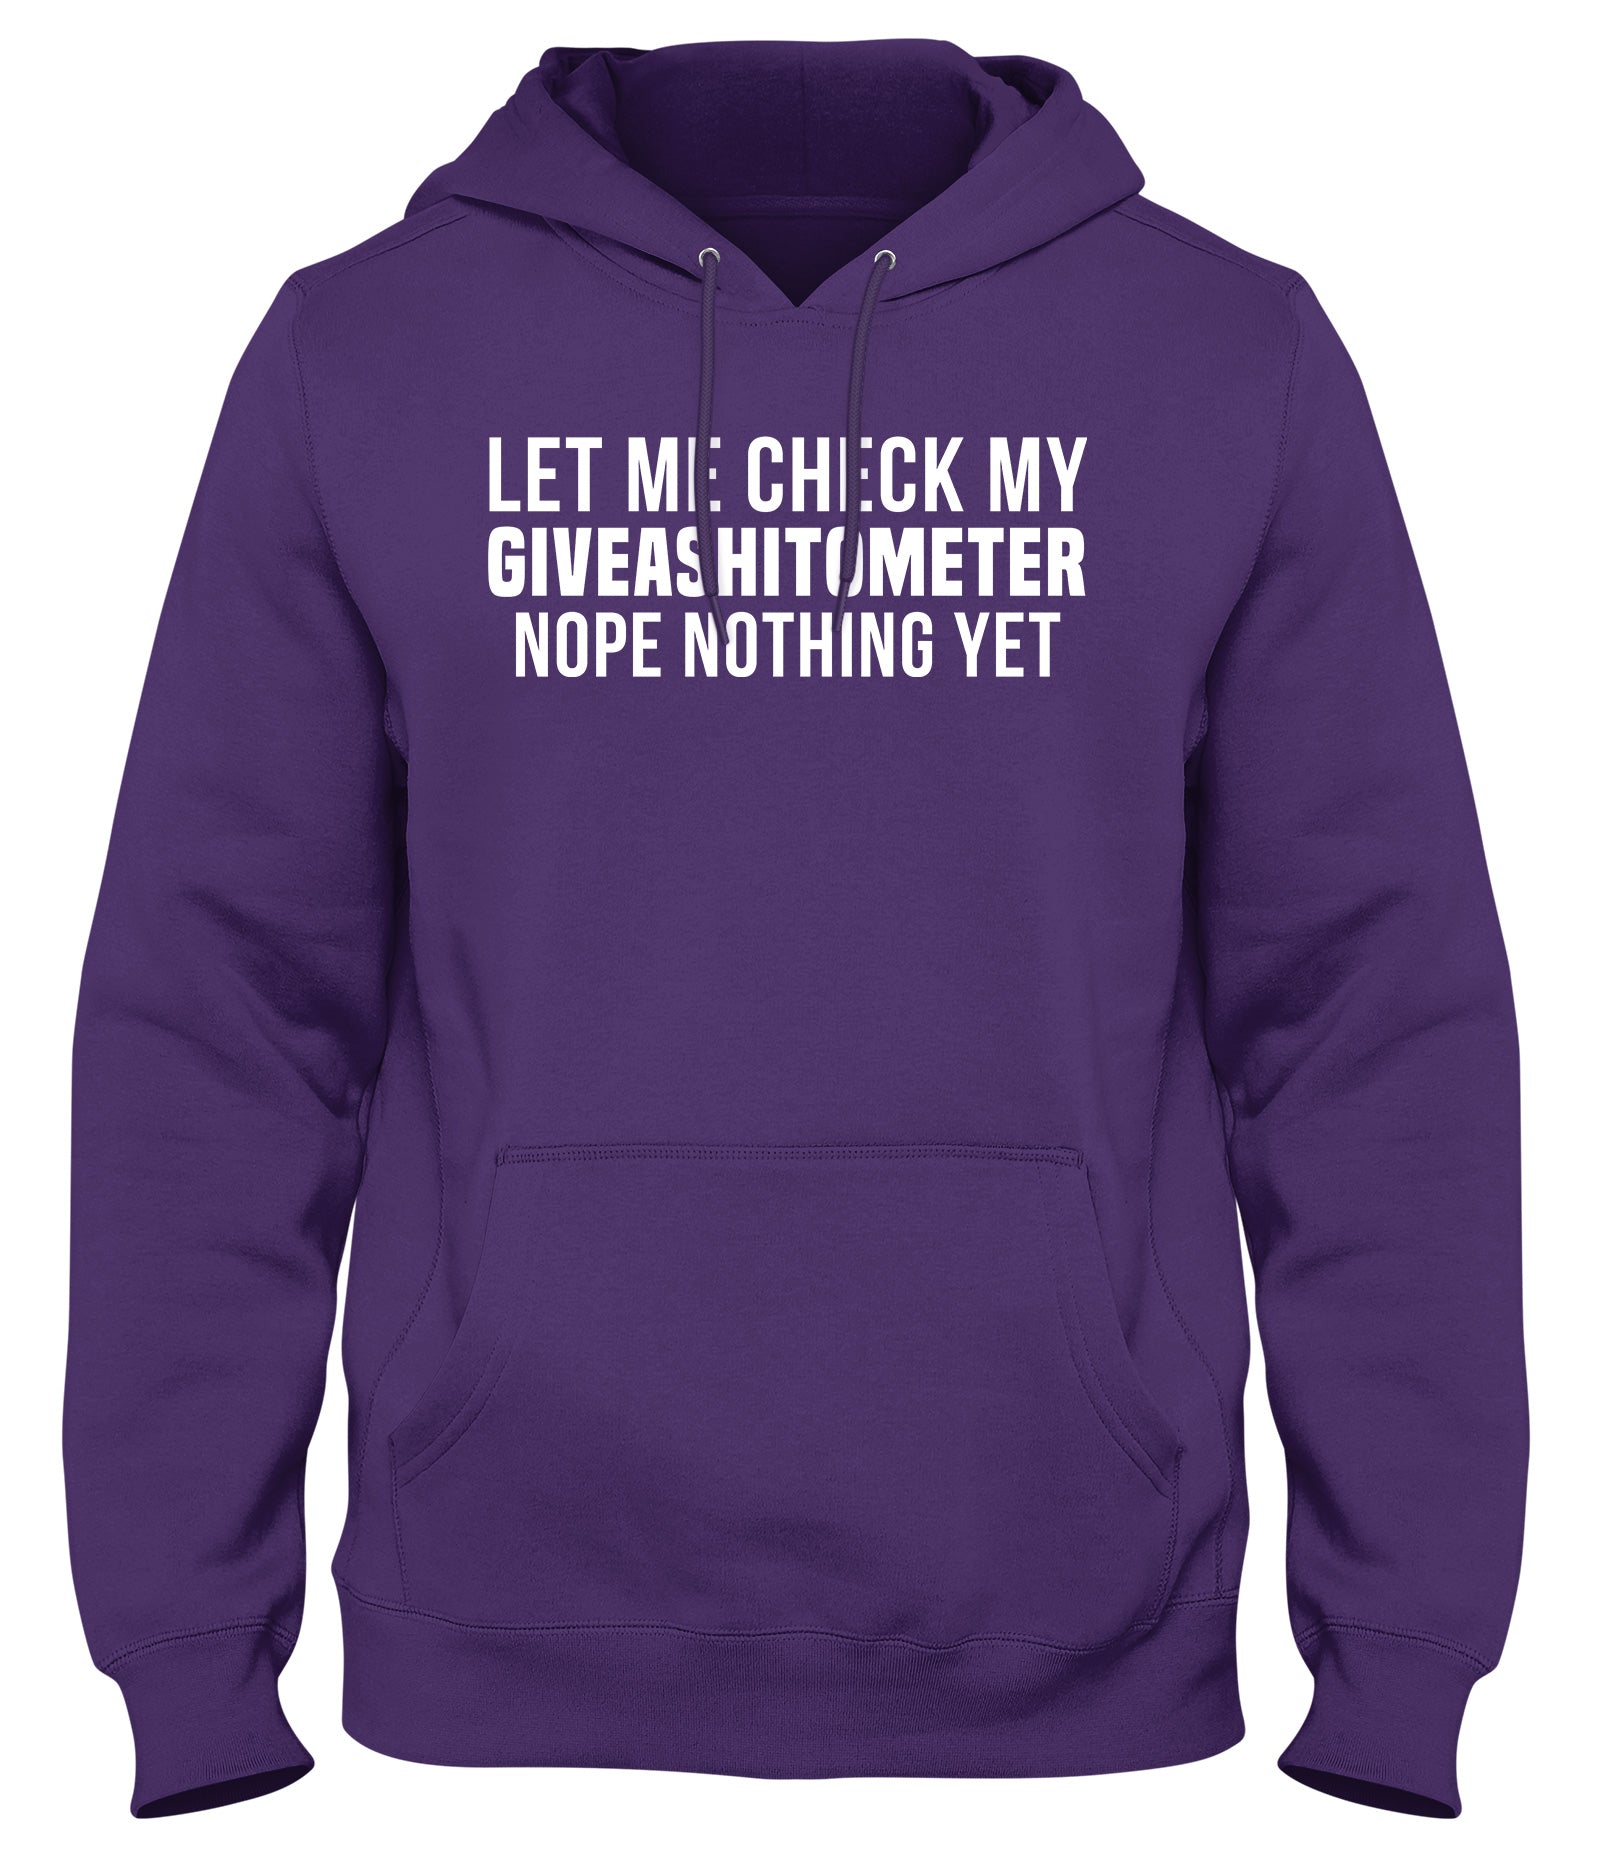 LET ME CHECK MY GIVEASHITOMETER NOPE NOTHING YET MENS WOMENS UNISEX FUNNY HOODIE